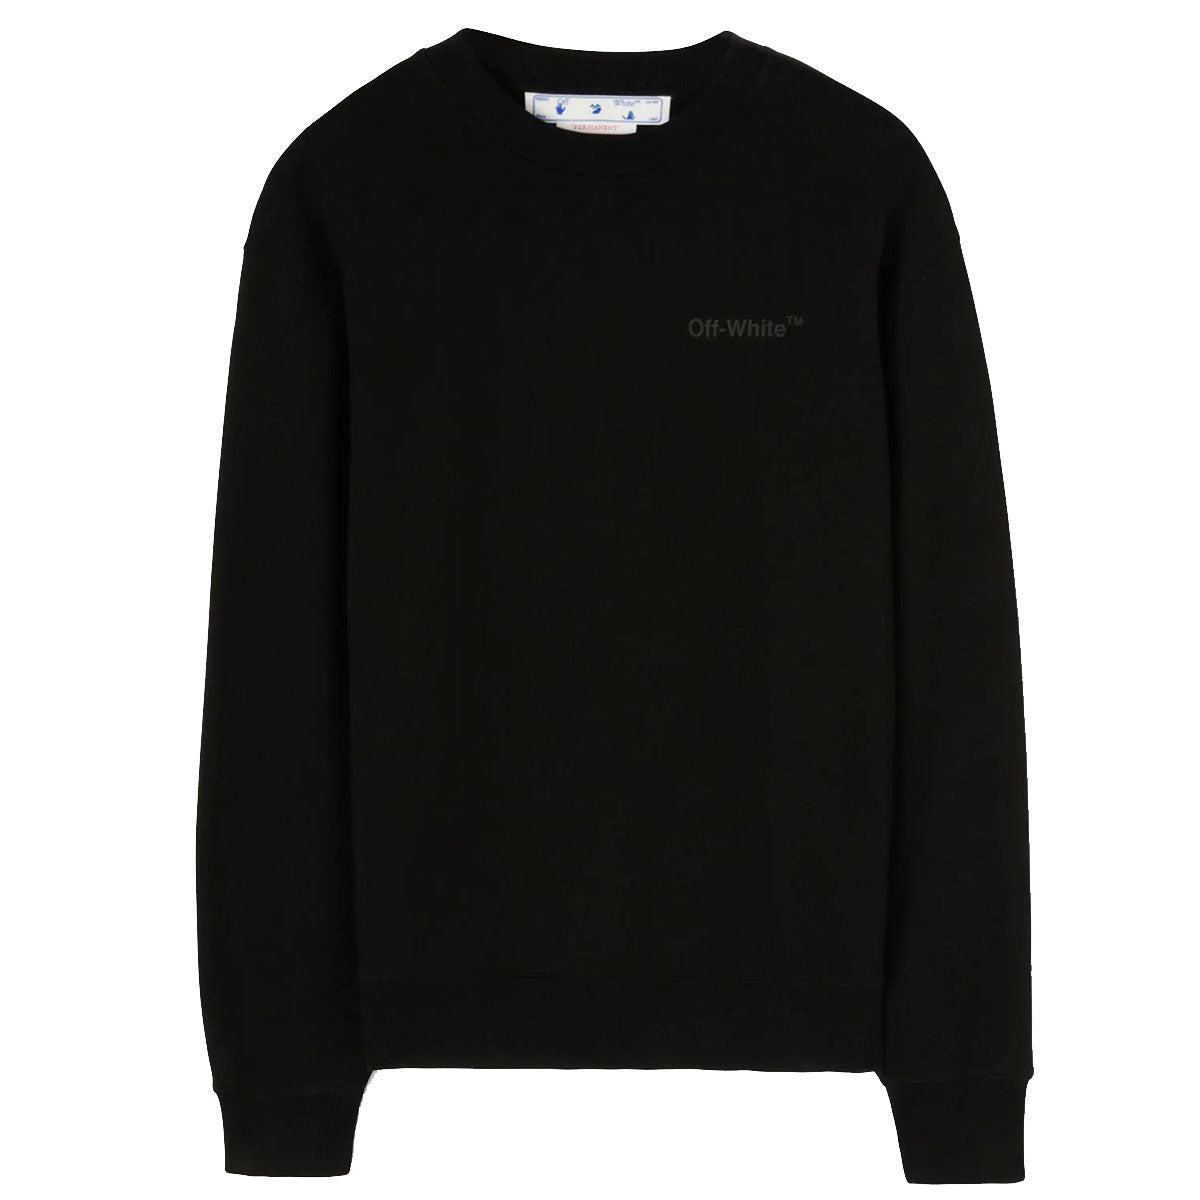 DIAG TAB SLIM CREWNECK - Why are you here?